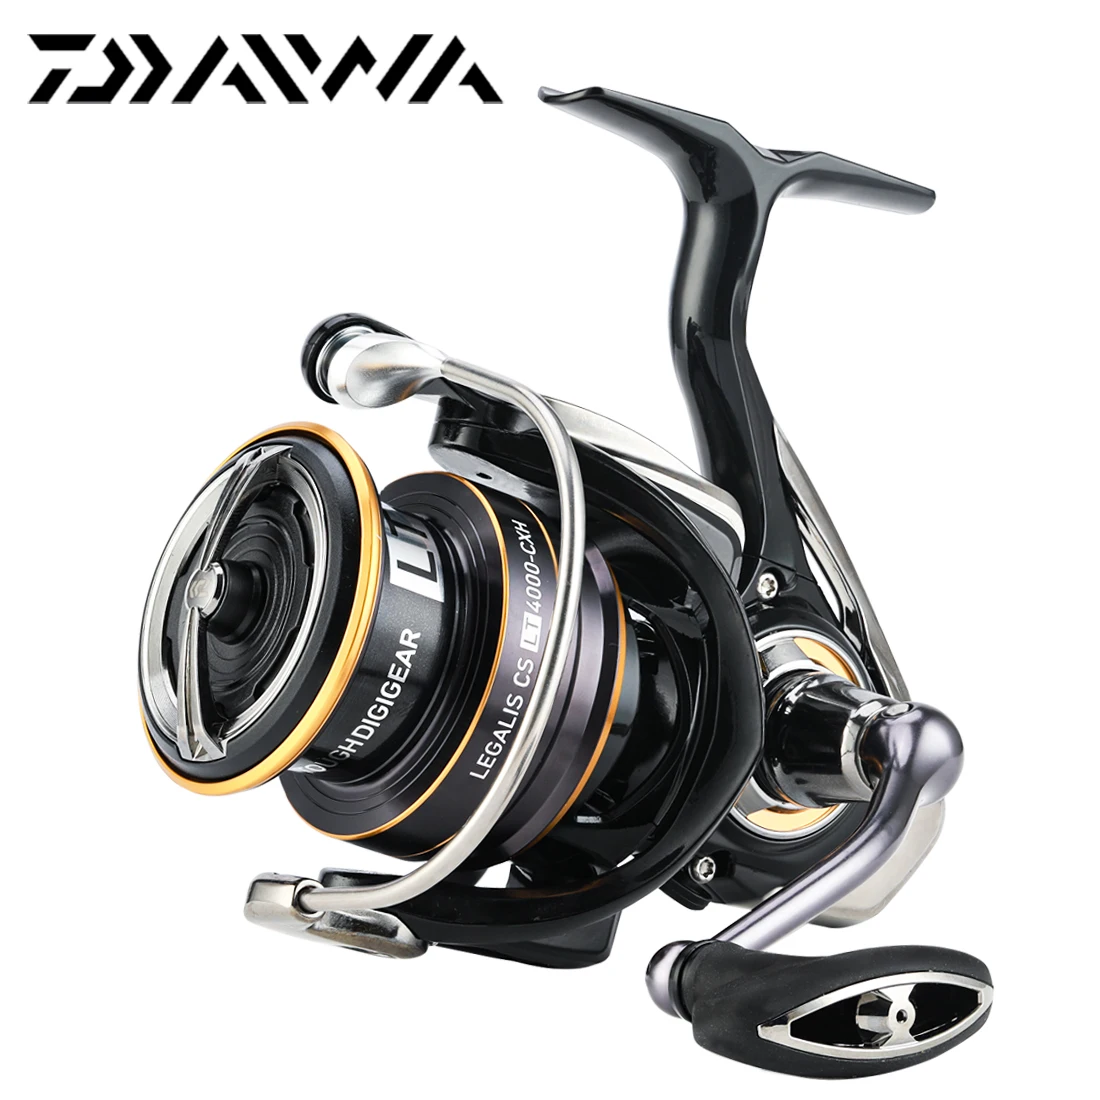 Details about   Daiwa spinning reel LEGALIS LT2500D from JAPAN FedEx With tracking number NEW 